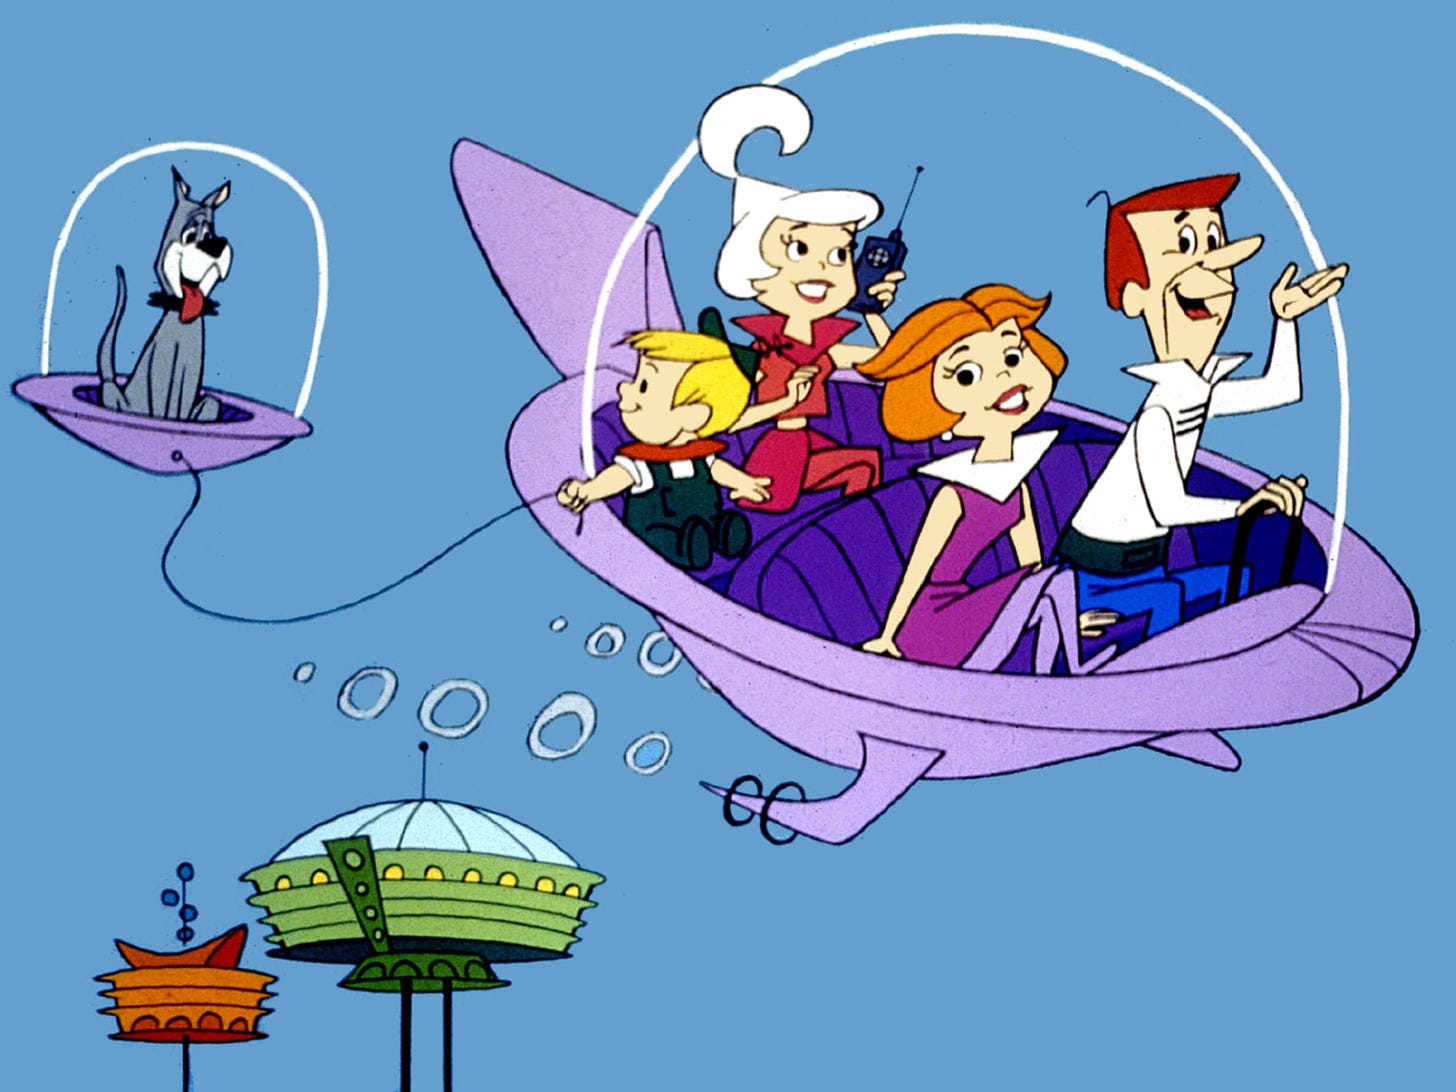 The Jetsons live-action reboot gets greenlight from ABC